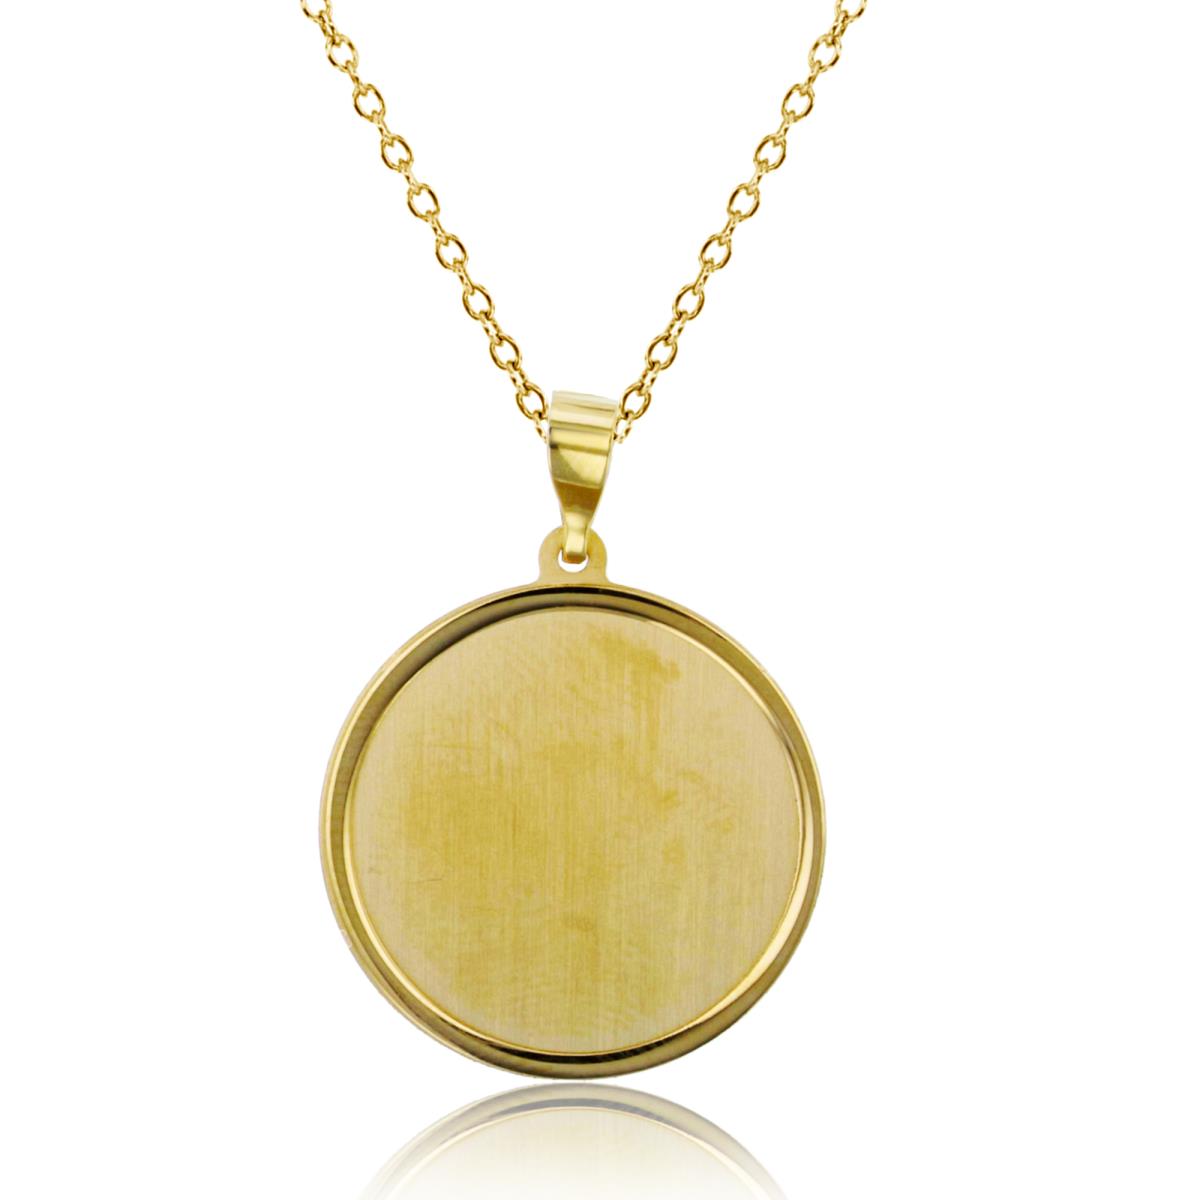 10K Yellow Gold 25x18mm Engravable Satin Medallion 18" Necklace